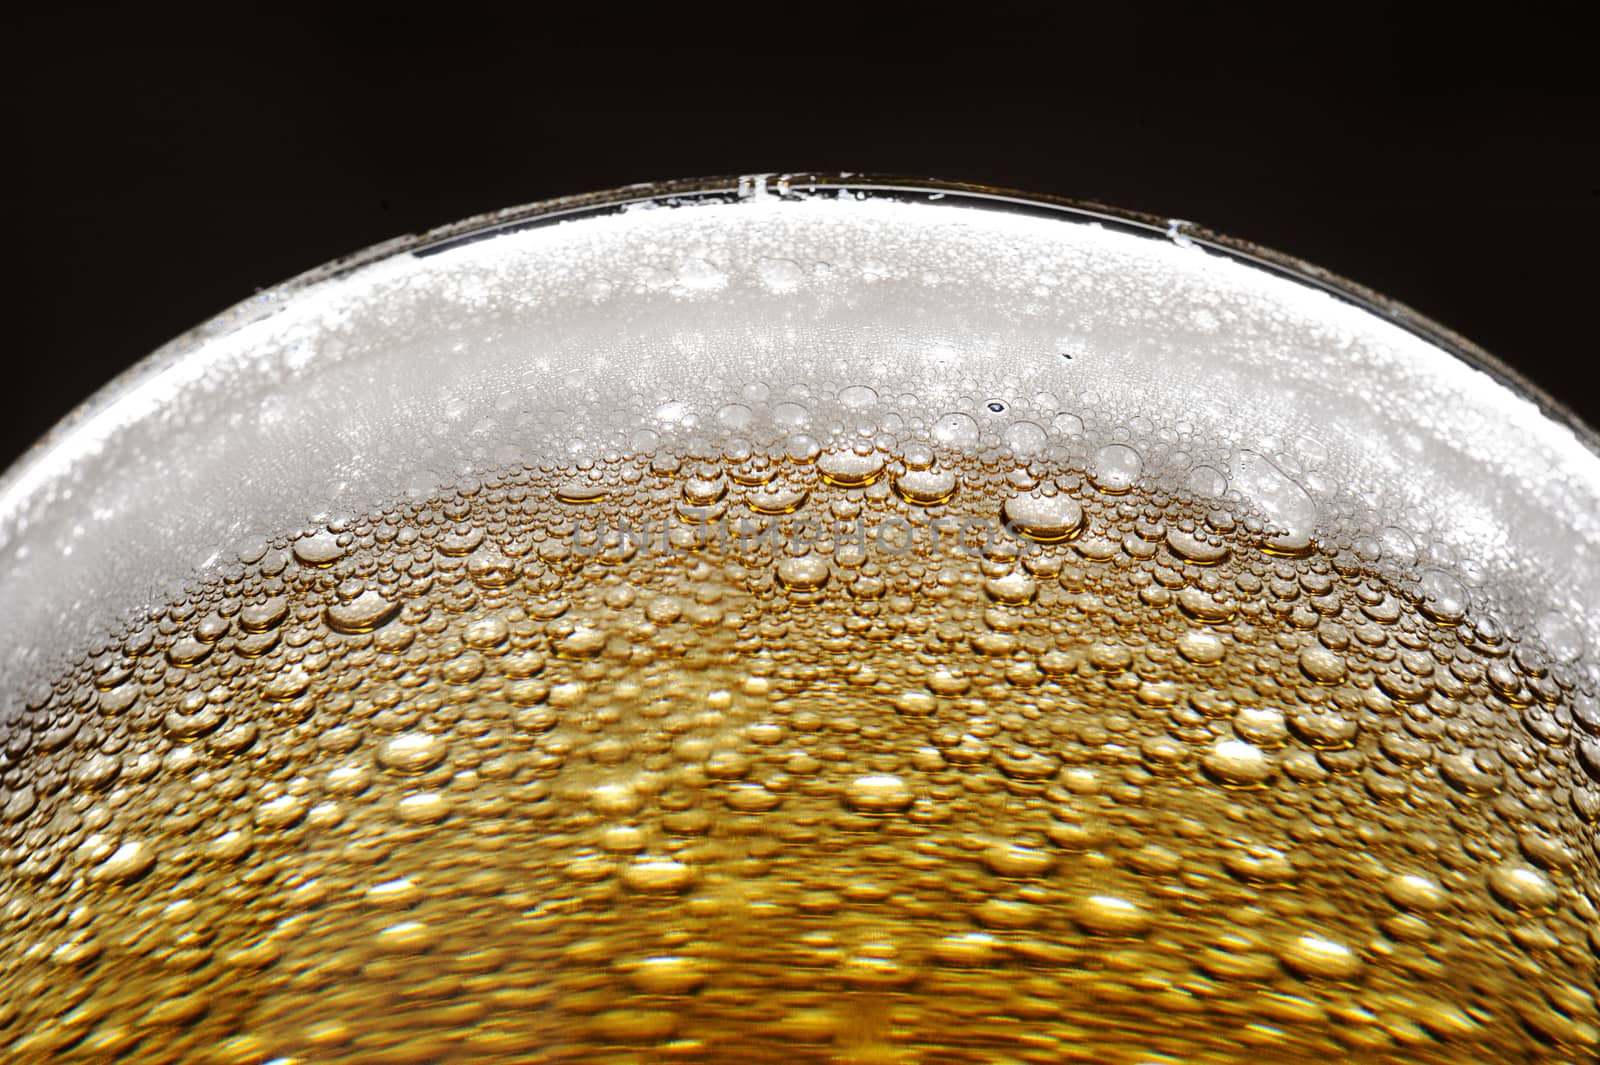 close up of bubbles on beer foam in glass